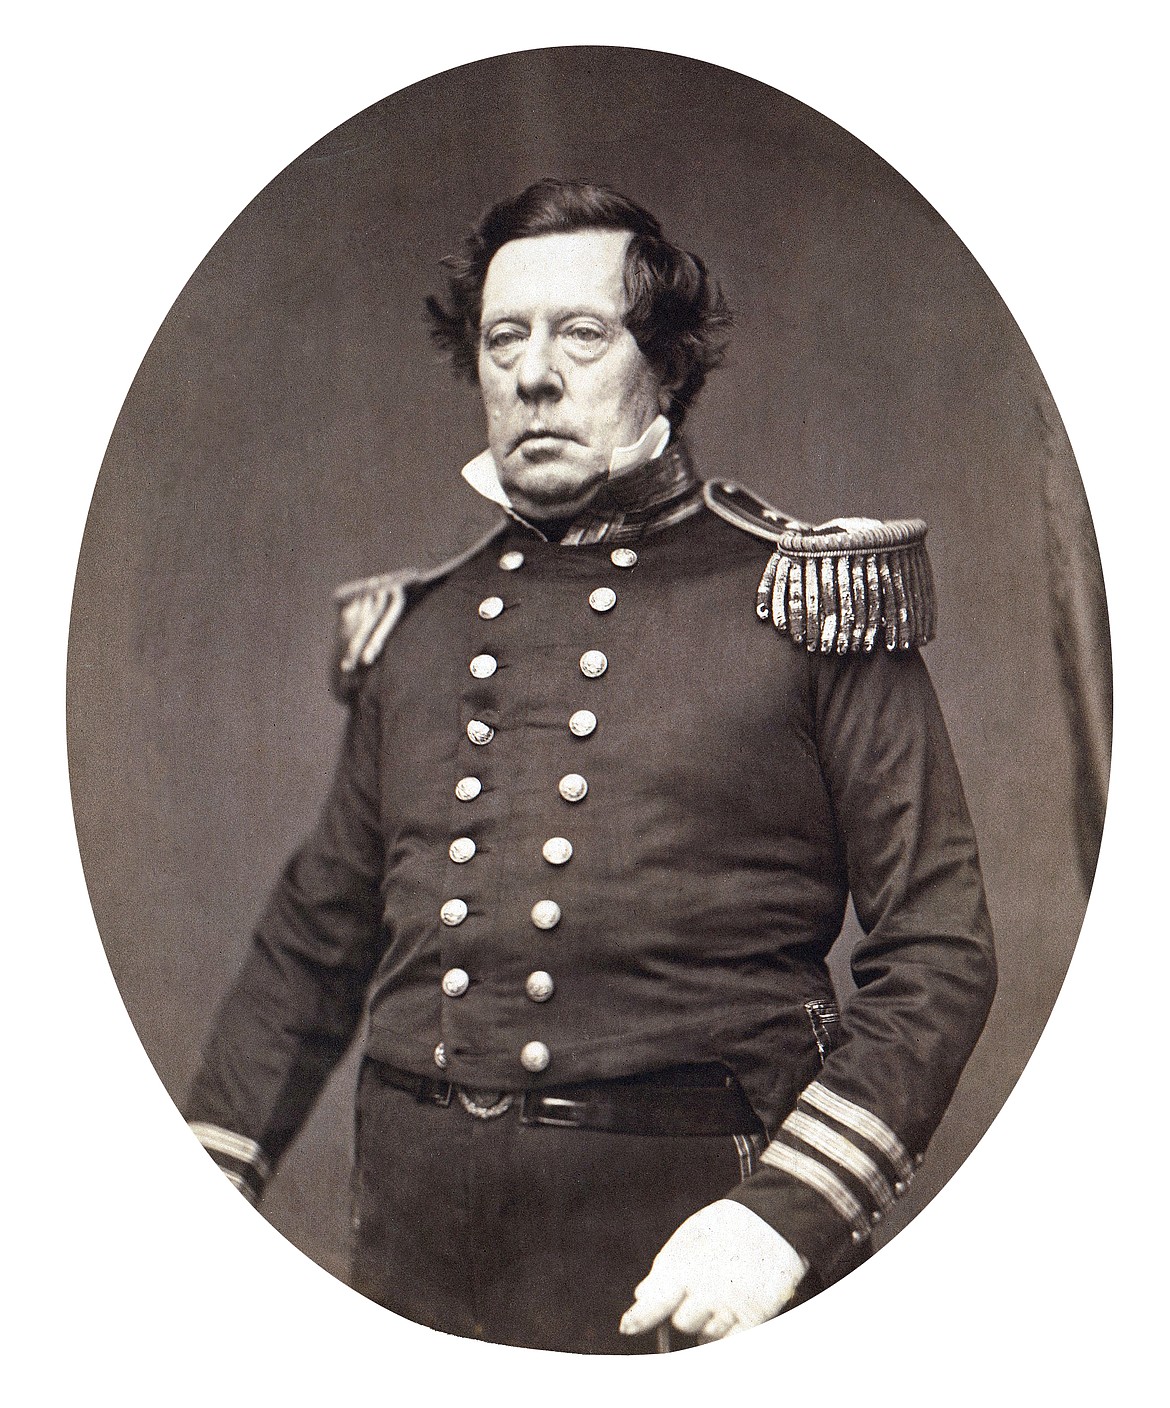 Commodore Matthew C. Perry (1794-1858), who sailed into Edo Bay (now Tokyo Bay) in 1853 with a show of U.S. naval power and demanded that feudal Japan open up to trade, an event that changed Japanese history forever.